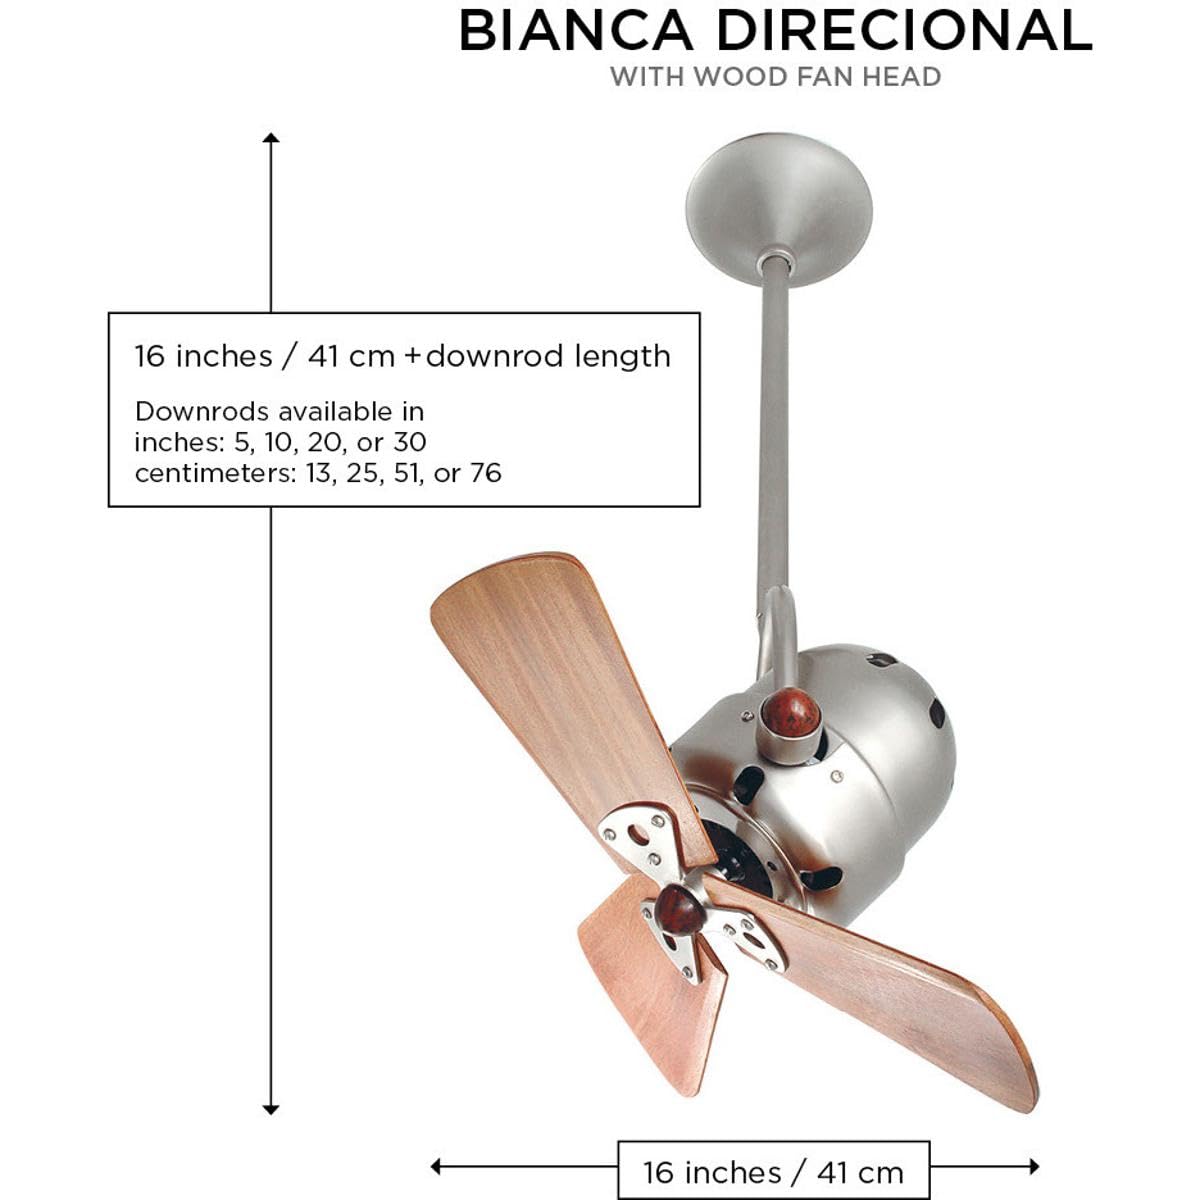 Matthews Fan BD-BN-WD Bianca Direcional ceiling fan in Brushed Nickel finish with solid sustainable mahogany wood blades.